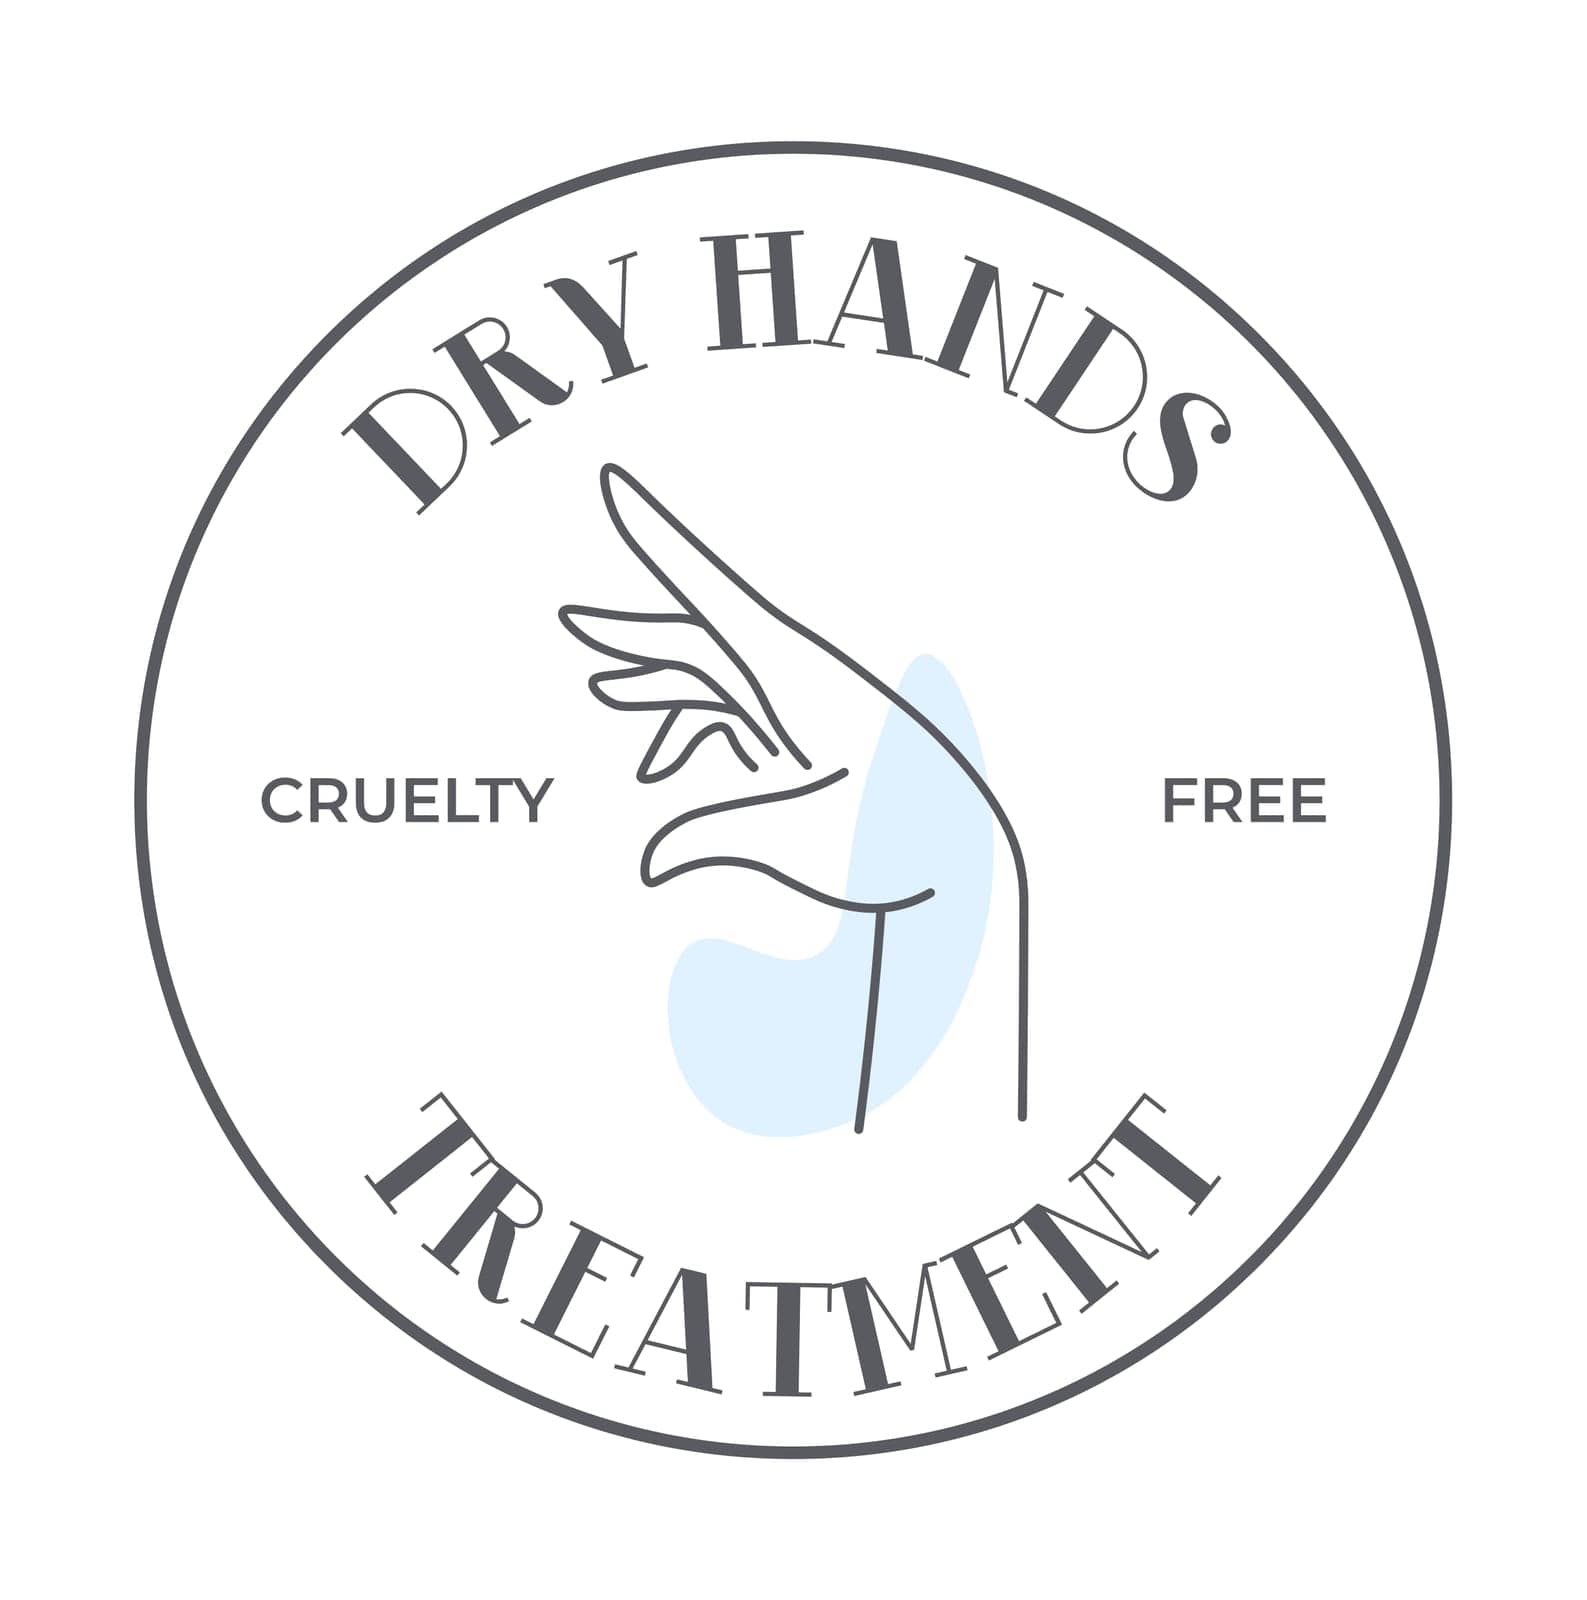 Soft cream for dry hands, treatment and skincare for ladies. Cruelty free and ecologically friendly formula for protection. Label or emblem for package, promo banner. Vector in flat style illustration